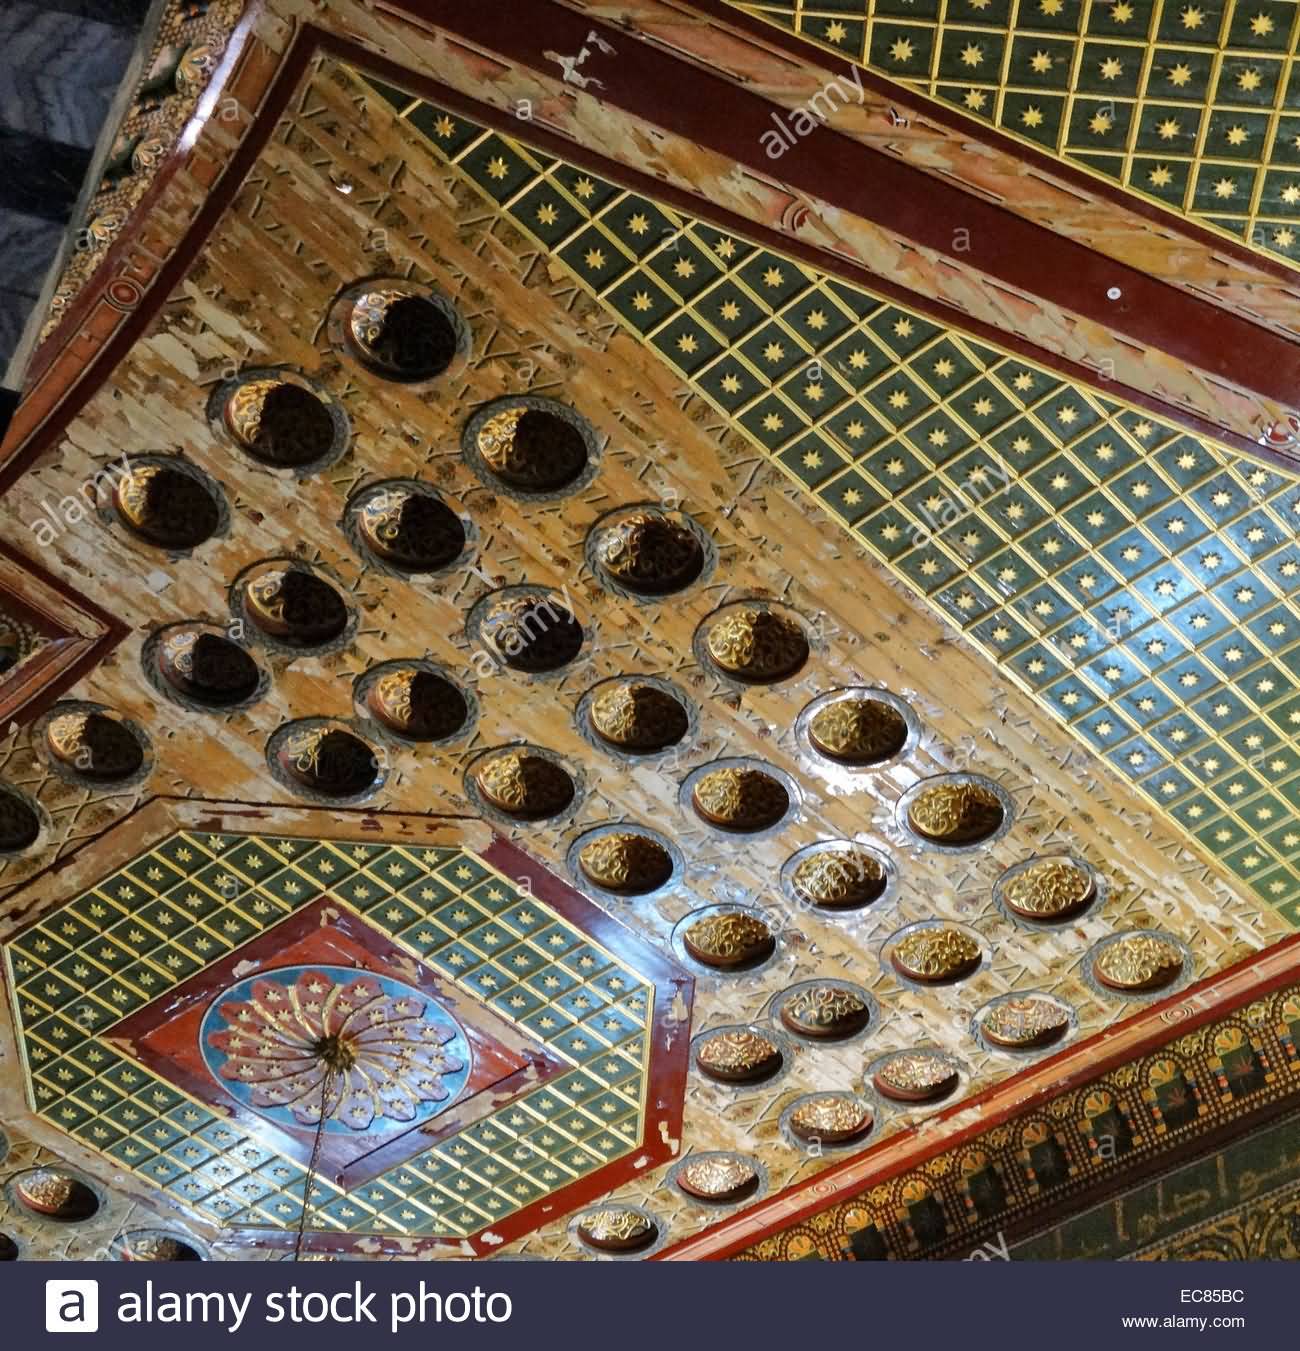 Interior Decoration Of The Dome Of The Rock Shrine